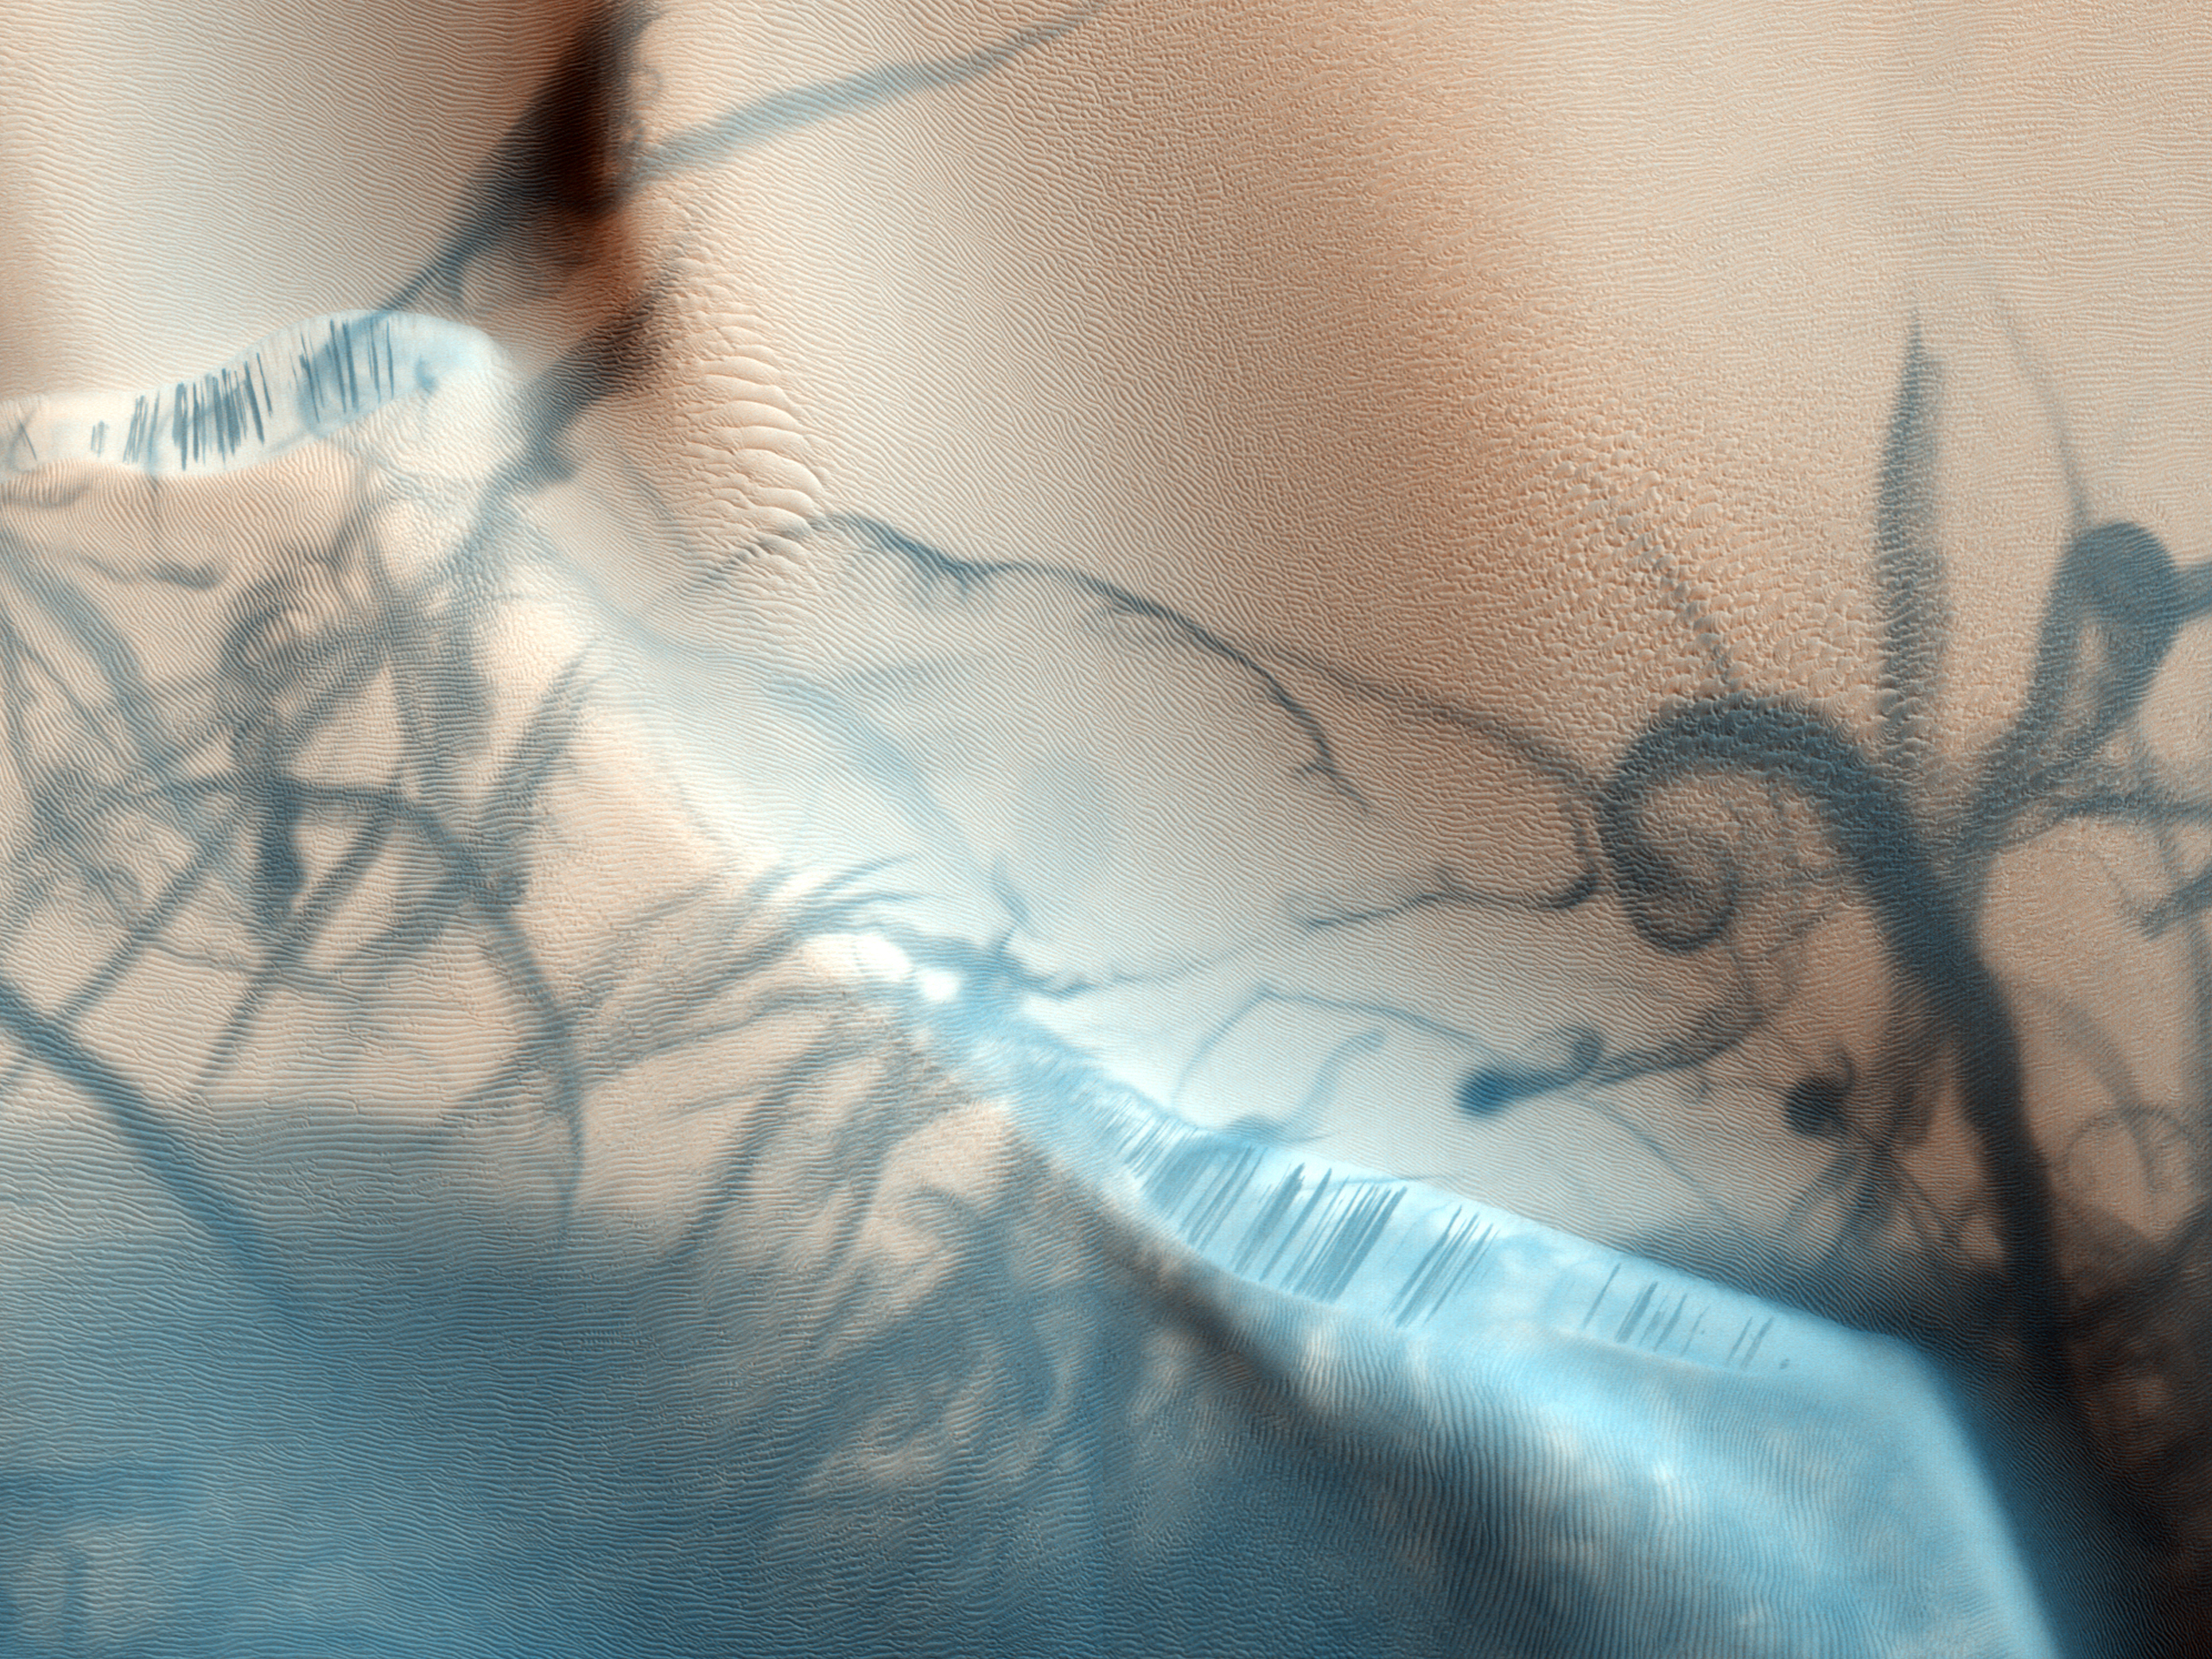 This portion of a recent high-resolution picture from the HiRISE camera on board the Mars Reconnaissance Orbiter shows twisting dark trails criss-crossing light coloured terrain on the Martian surface. Newly formed trails like these had presented researchers with a tantalizing Martian mystery but are now known to be the work of miniature wind vortices known to occur on the red planet - Martian dust devils. Such spinning columns of rising air heated by the warm surface are also common in dry and desert areas on planet Earth. Typically lasting only a few minutes, dust devils becoming visible as they pick up loose red-coloured dust leaving the darker and heavier sand beneath intact. On Mars, dust devils can be up to 8 kilometres high. Dust devils have been credited with unexpected cleanings of Mars rover solar panels. Image: NASA/JPL/University of Arizona. Original caption.